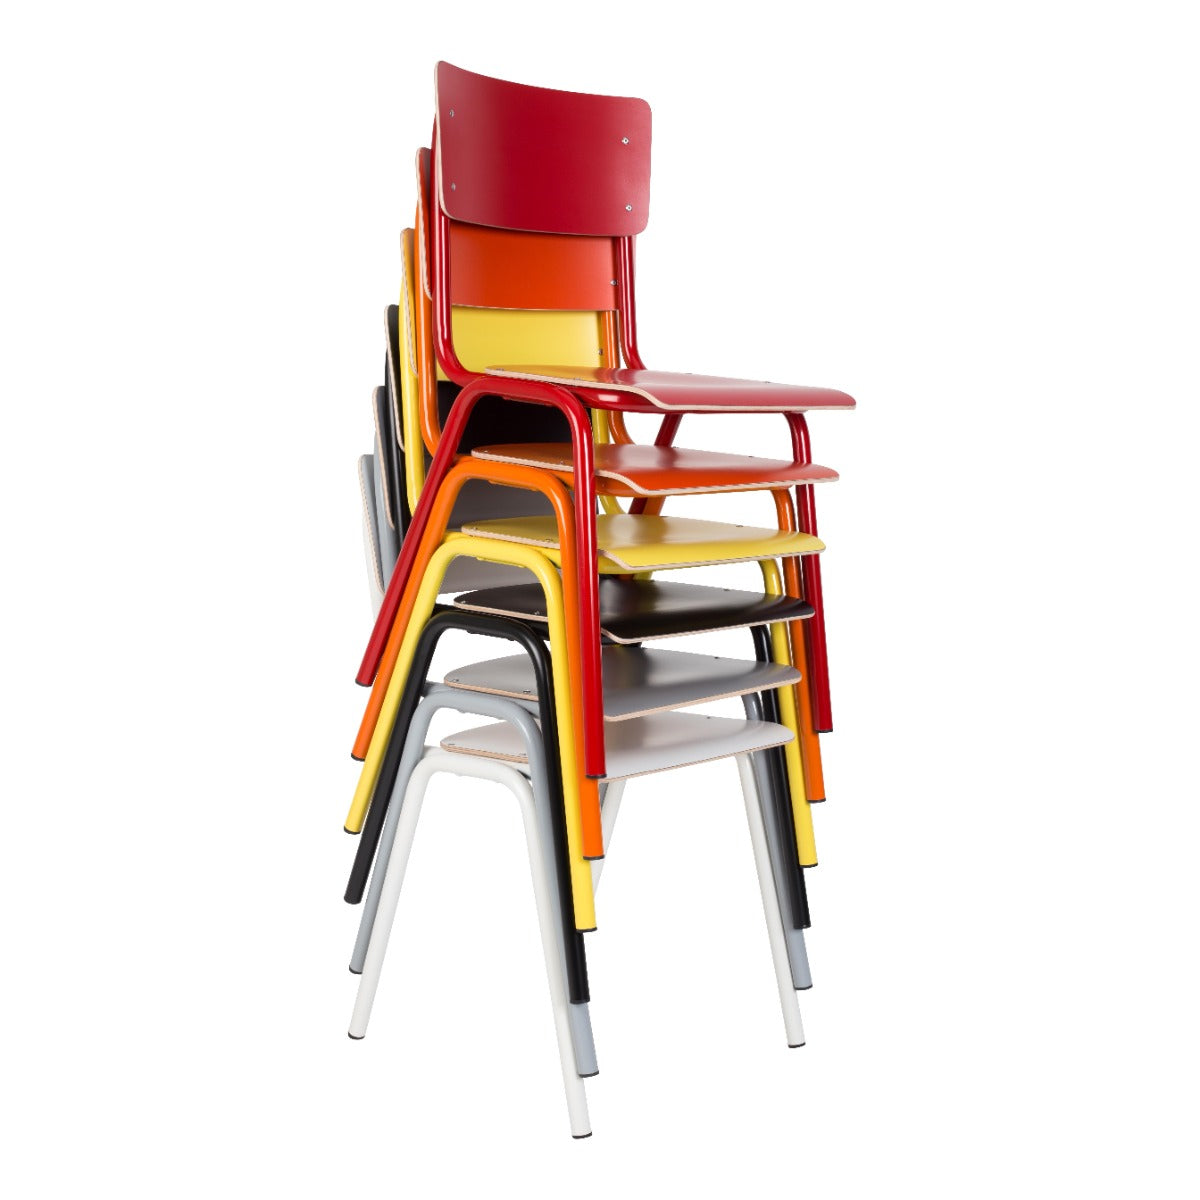 BACK TO SCHOOL chair white, Zuiver, Eye on Design